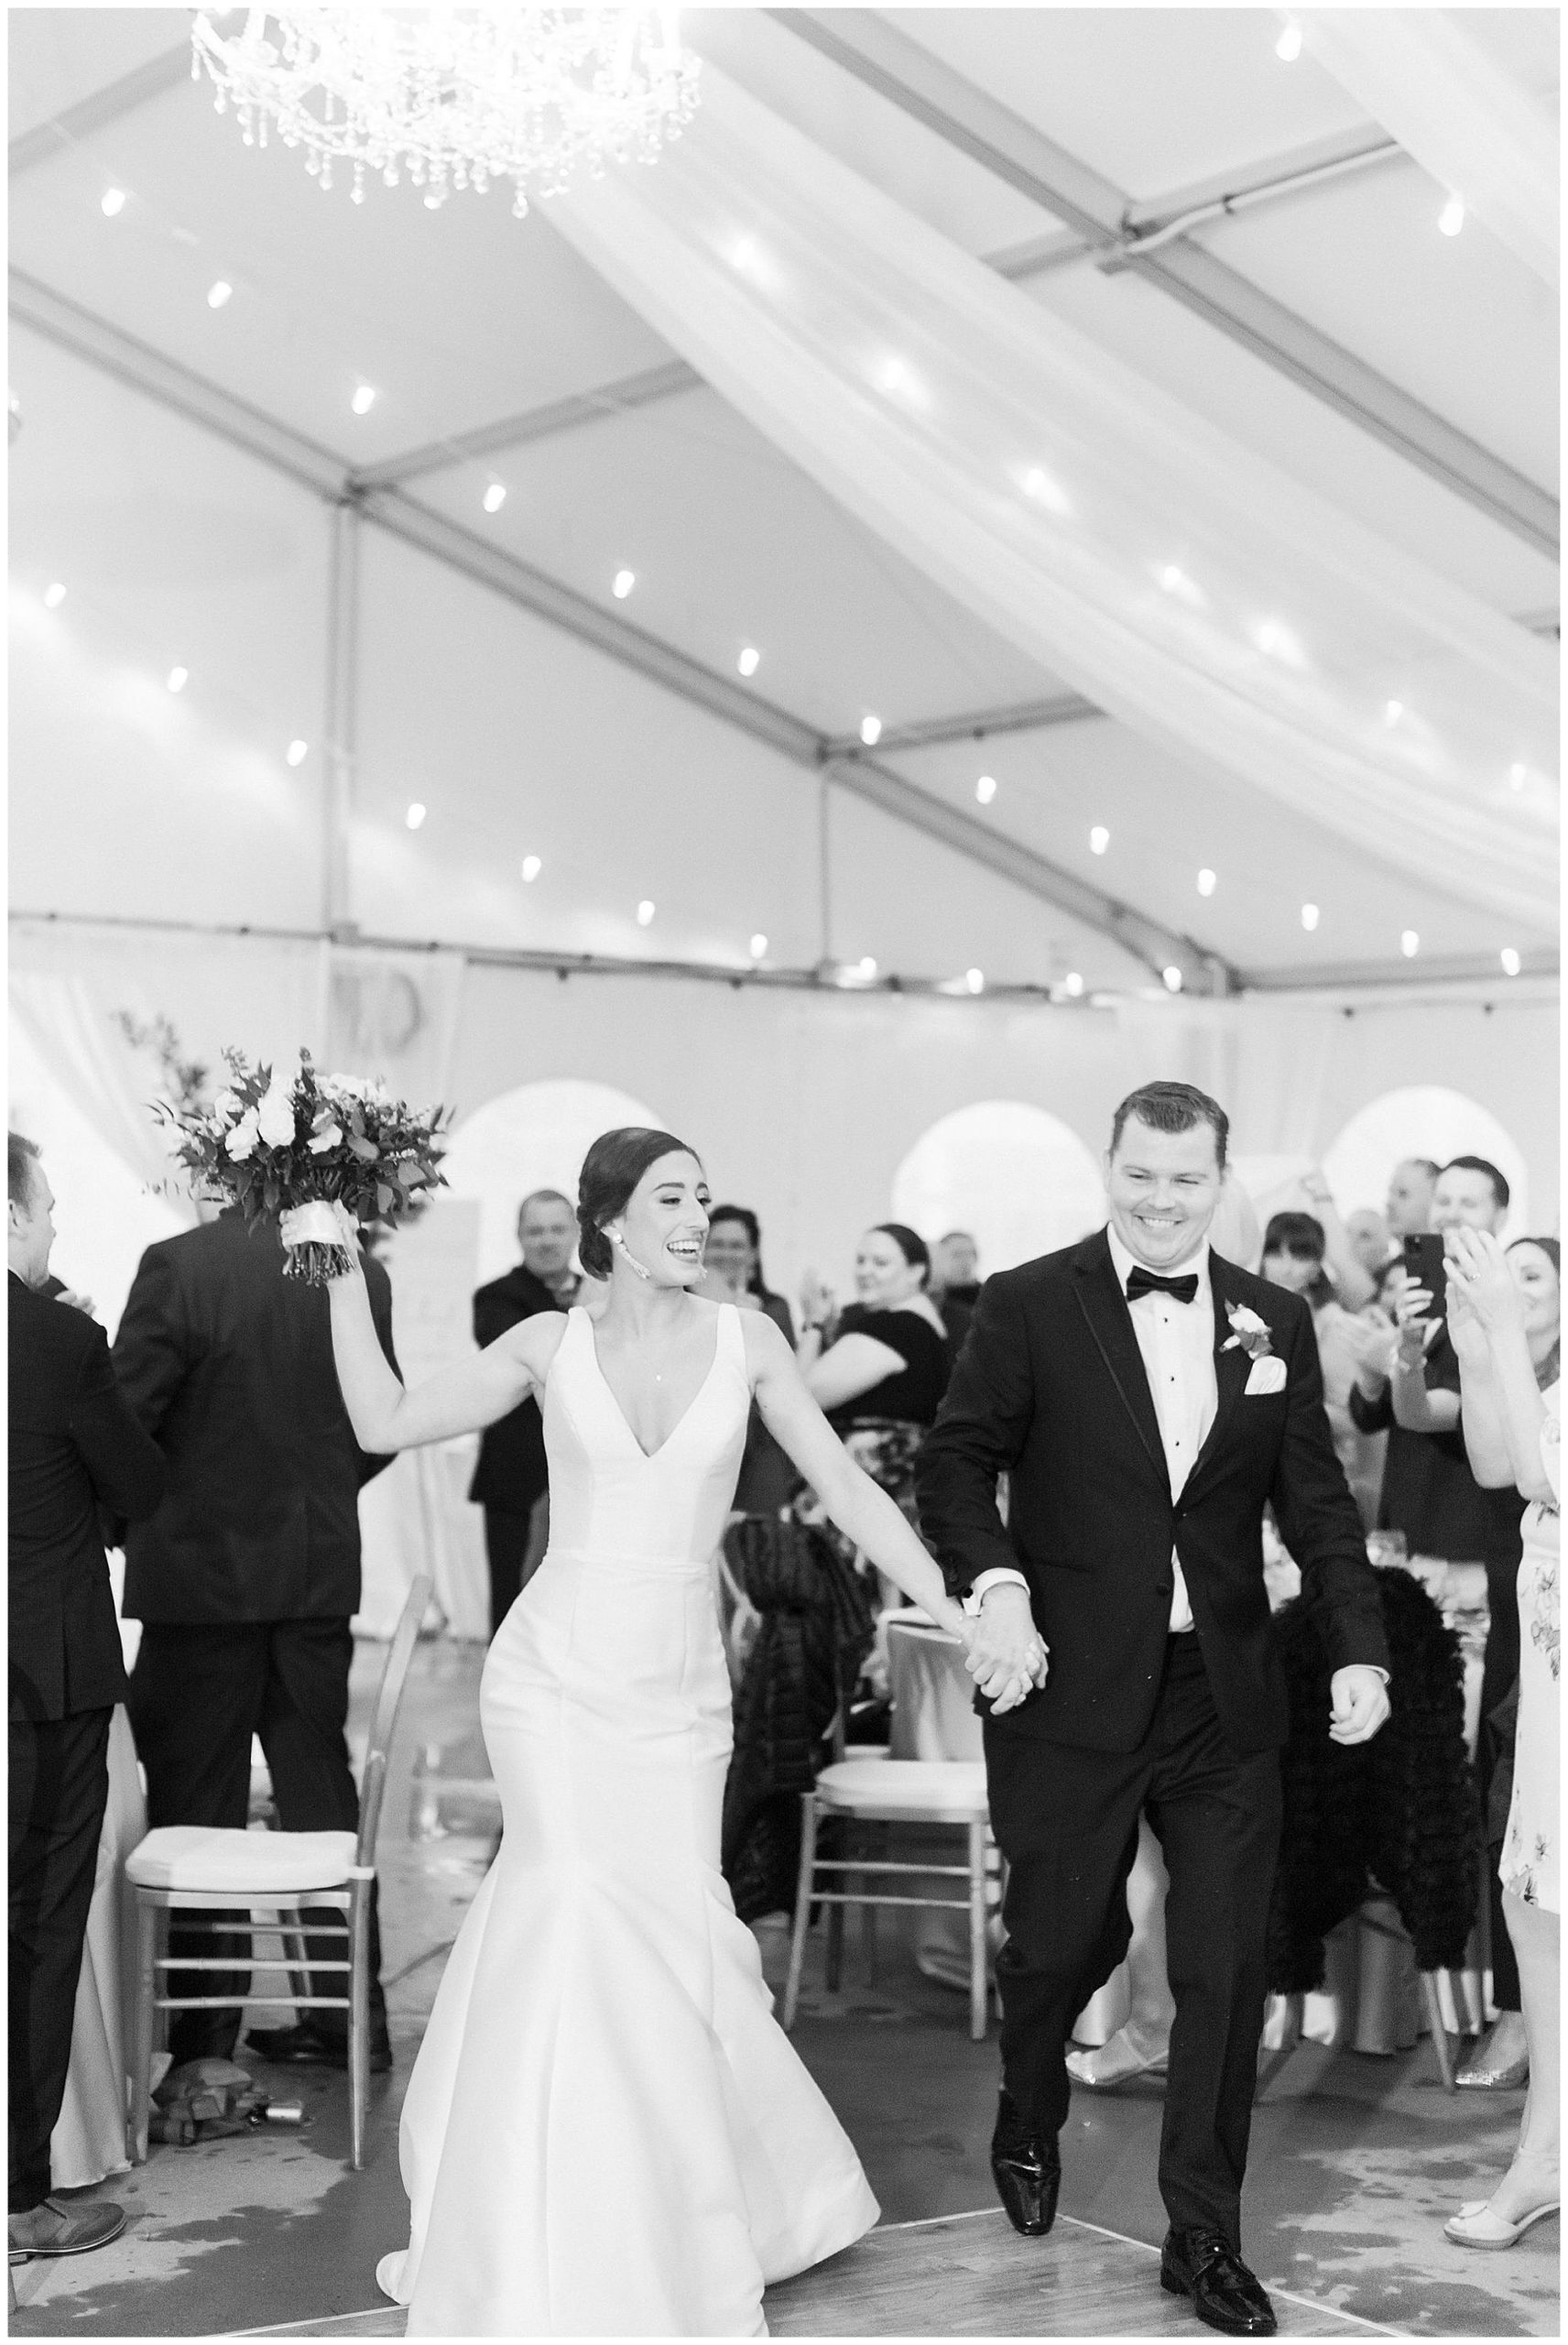 intro to tented wedding in black and white